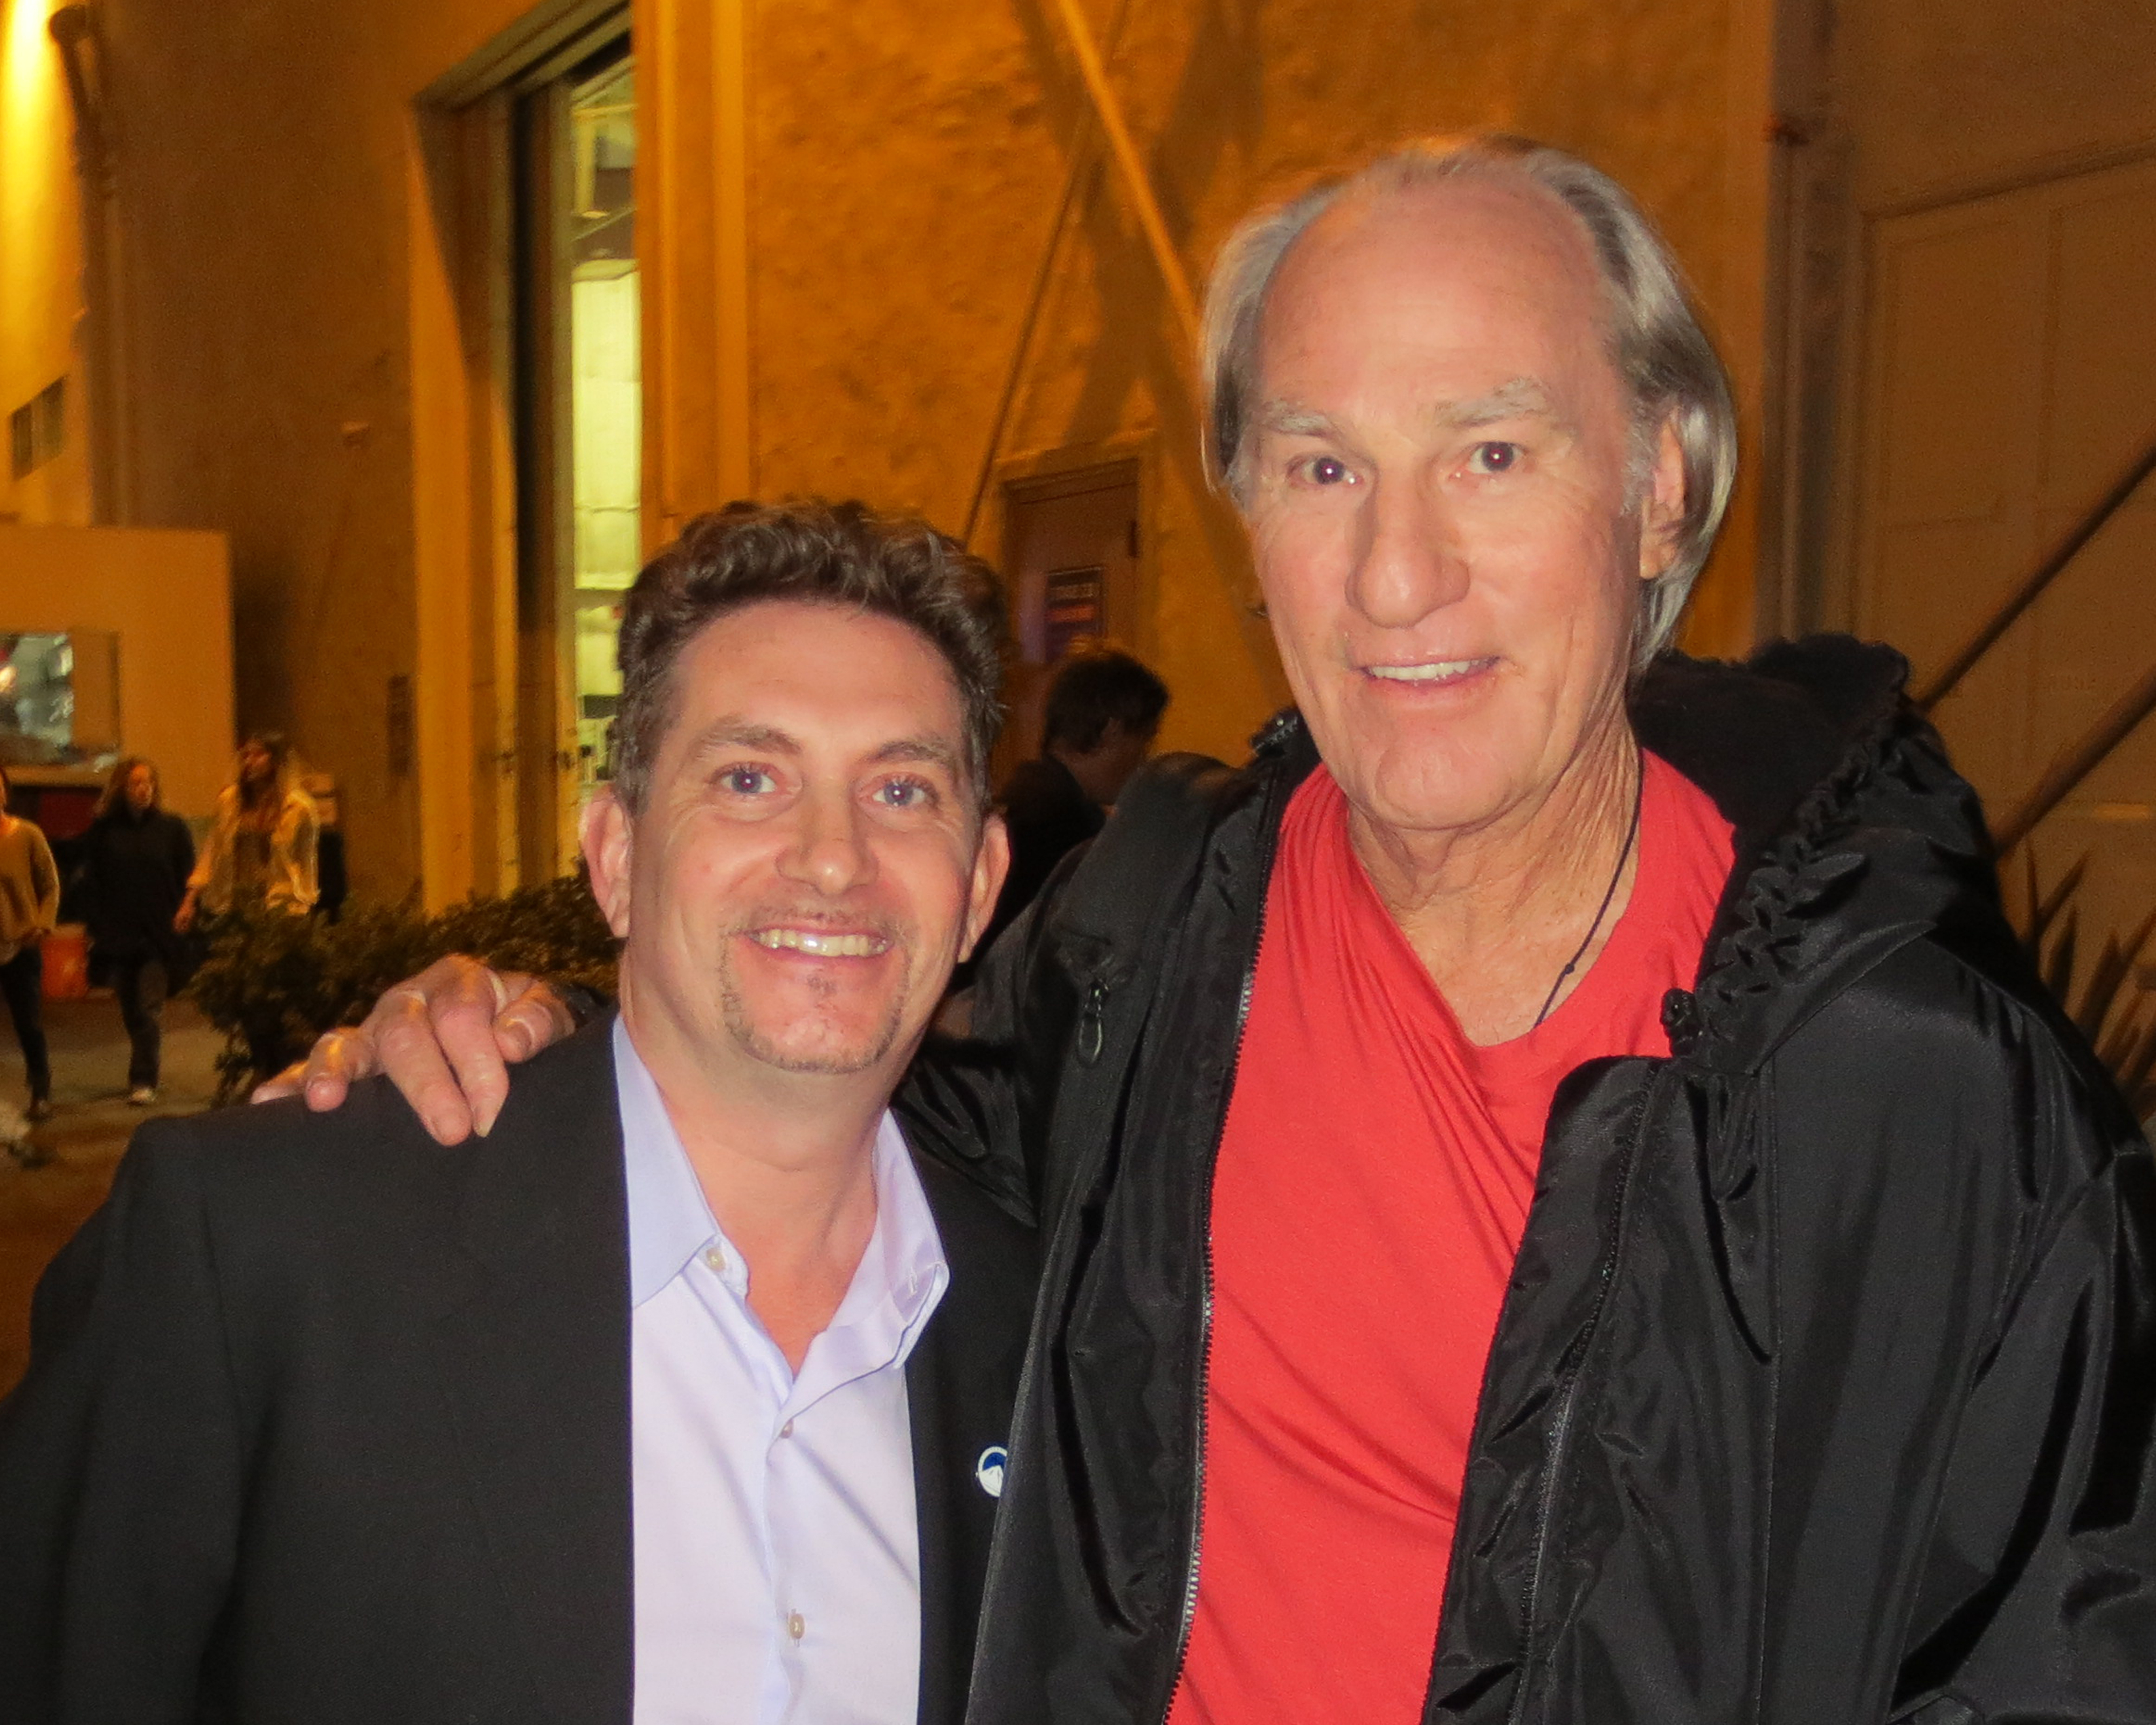 Michael Christaldi and Craig T. Nelson outside Stage 24 at Paramount Studios.